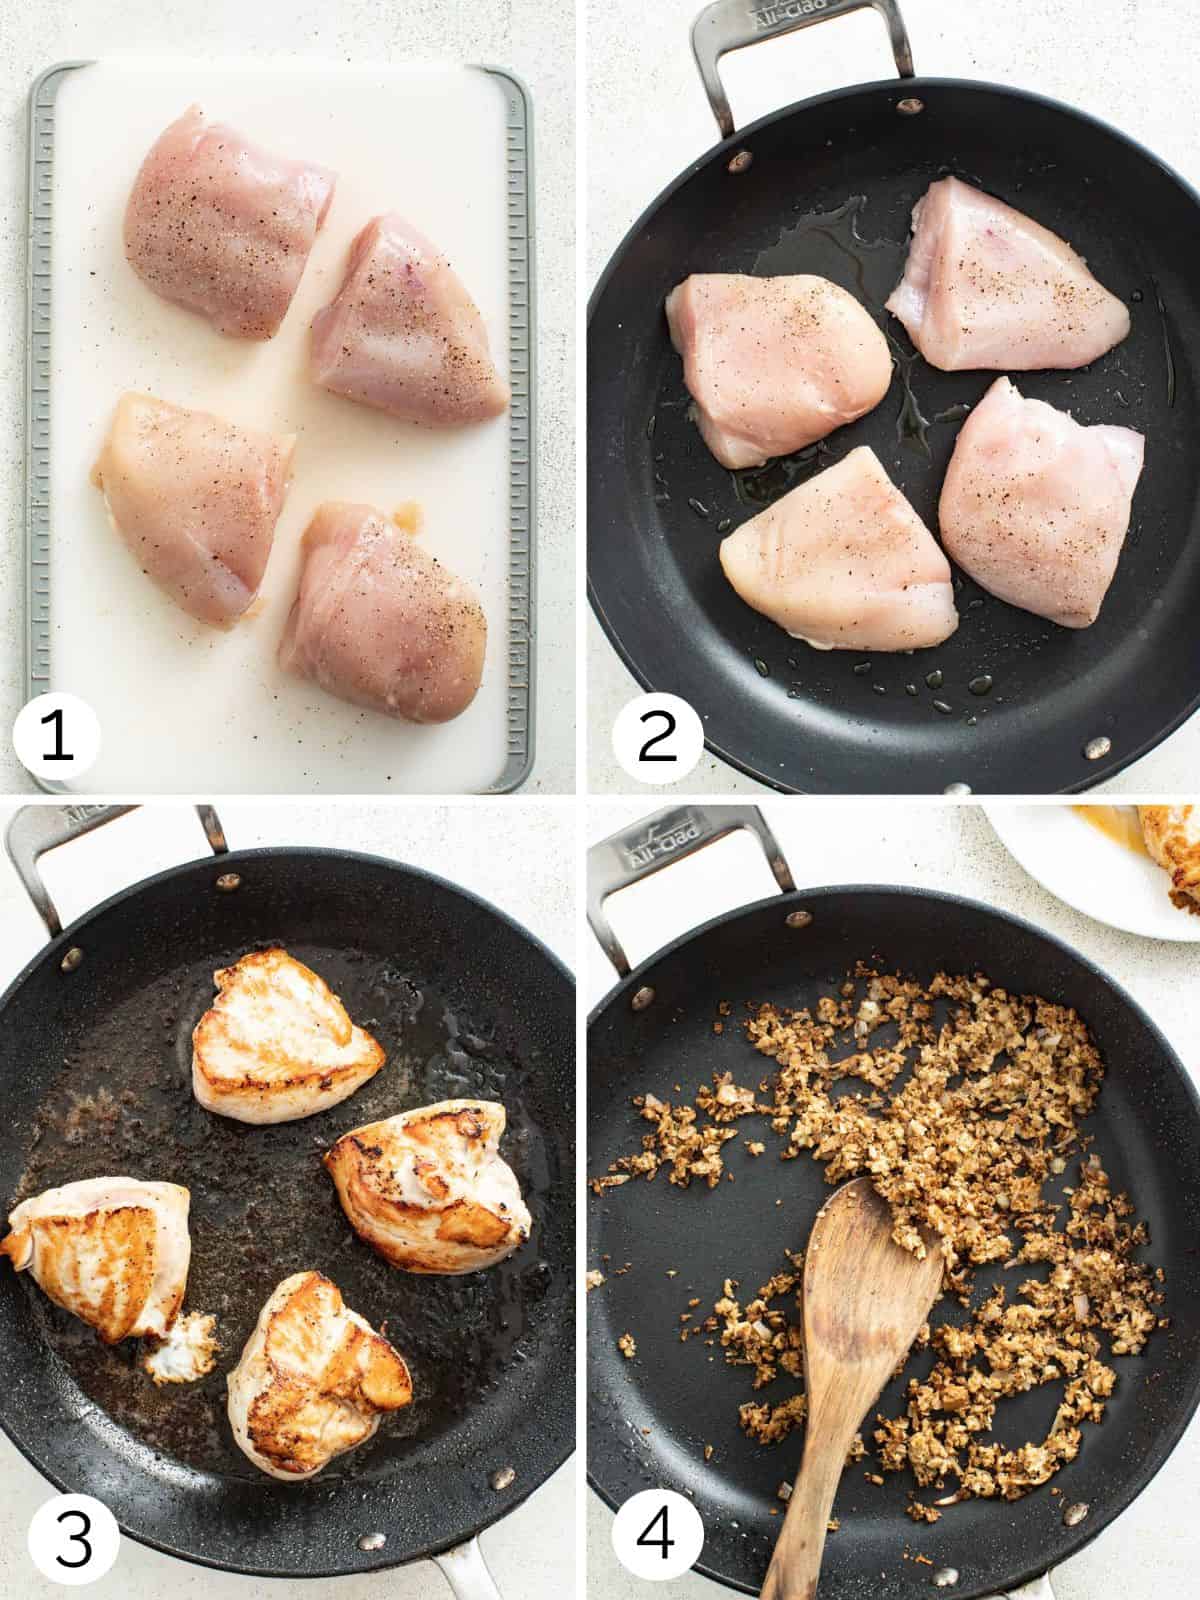 Sliced chicken being seared and then mushrooms being cooked in a cast iron pan.